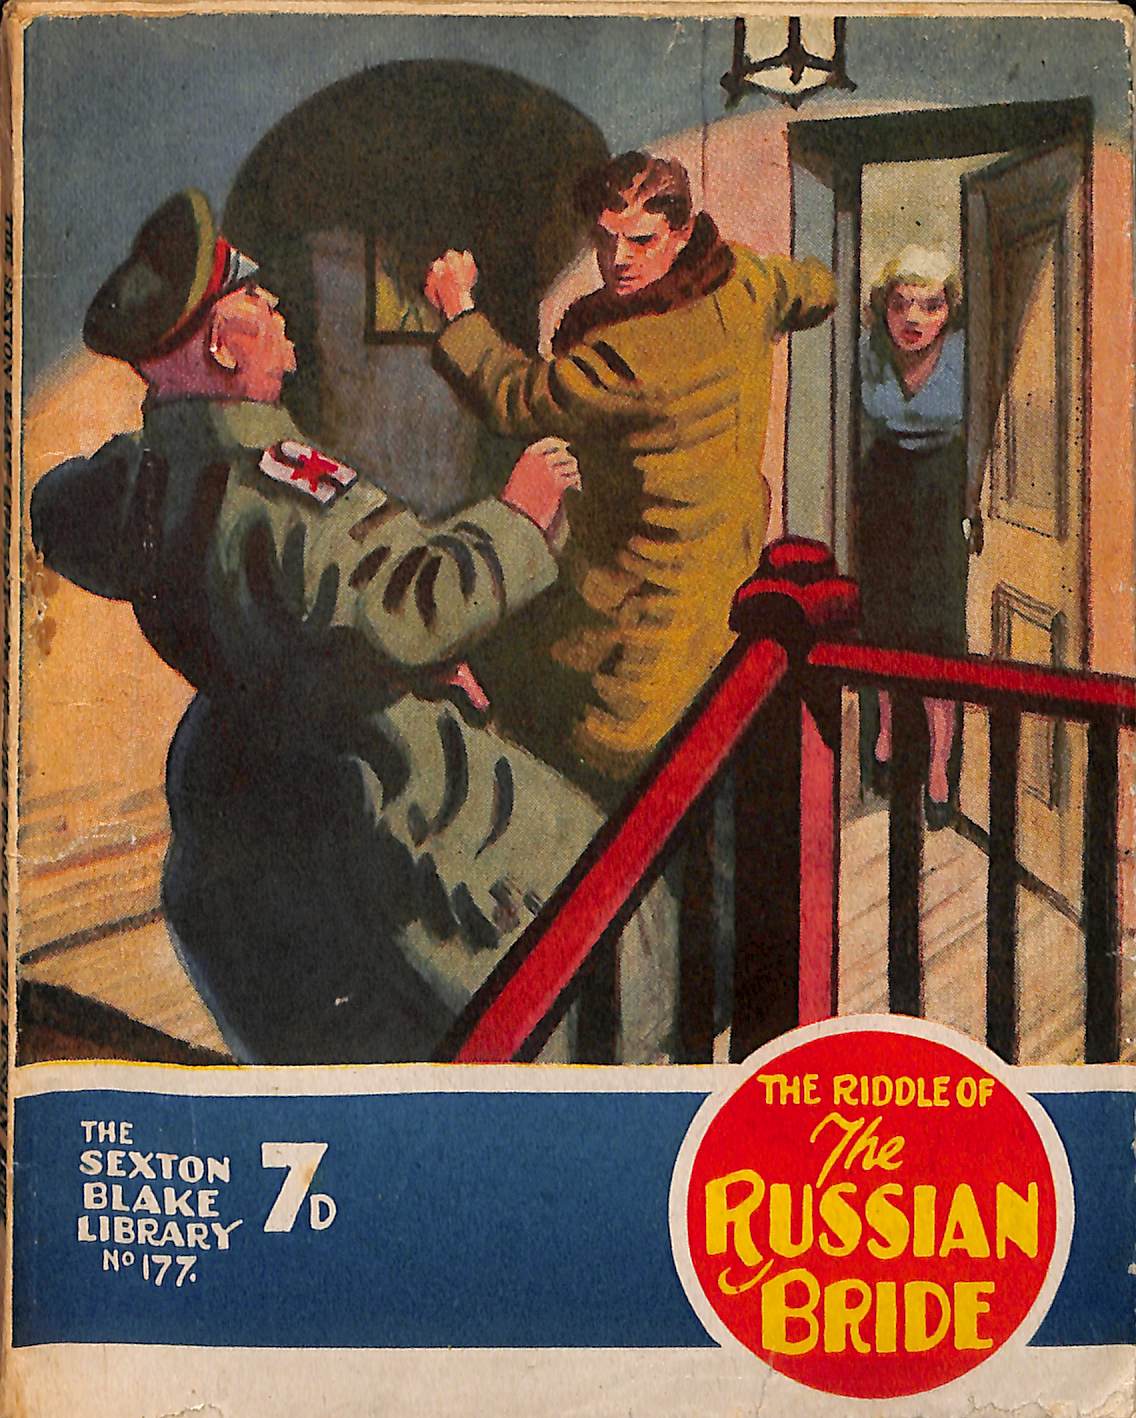 Book Cover For Sexton Blake Library S3 177 - The Riddle of the Russian Bride